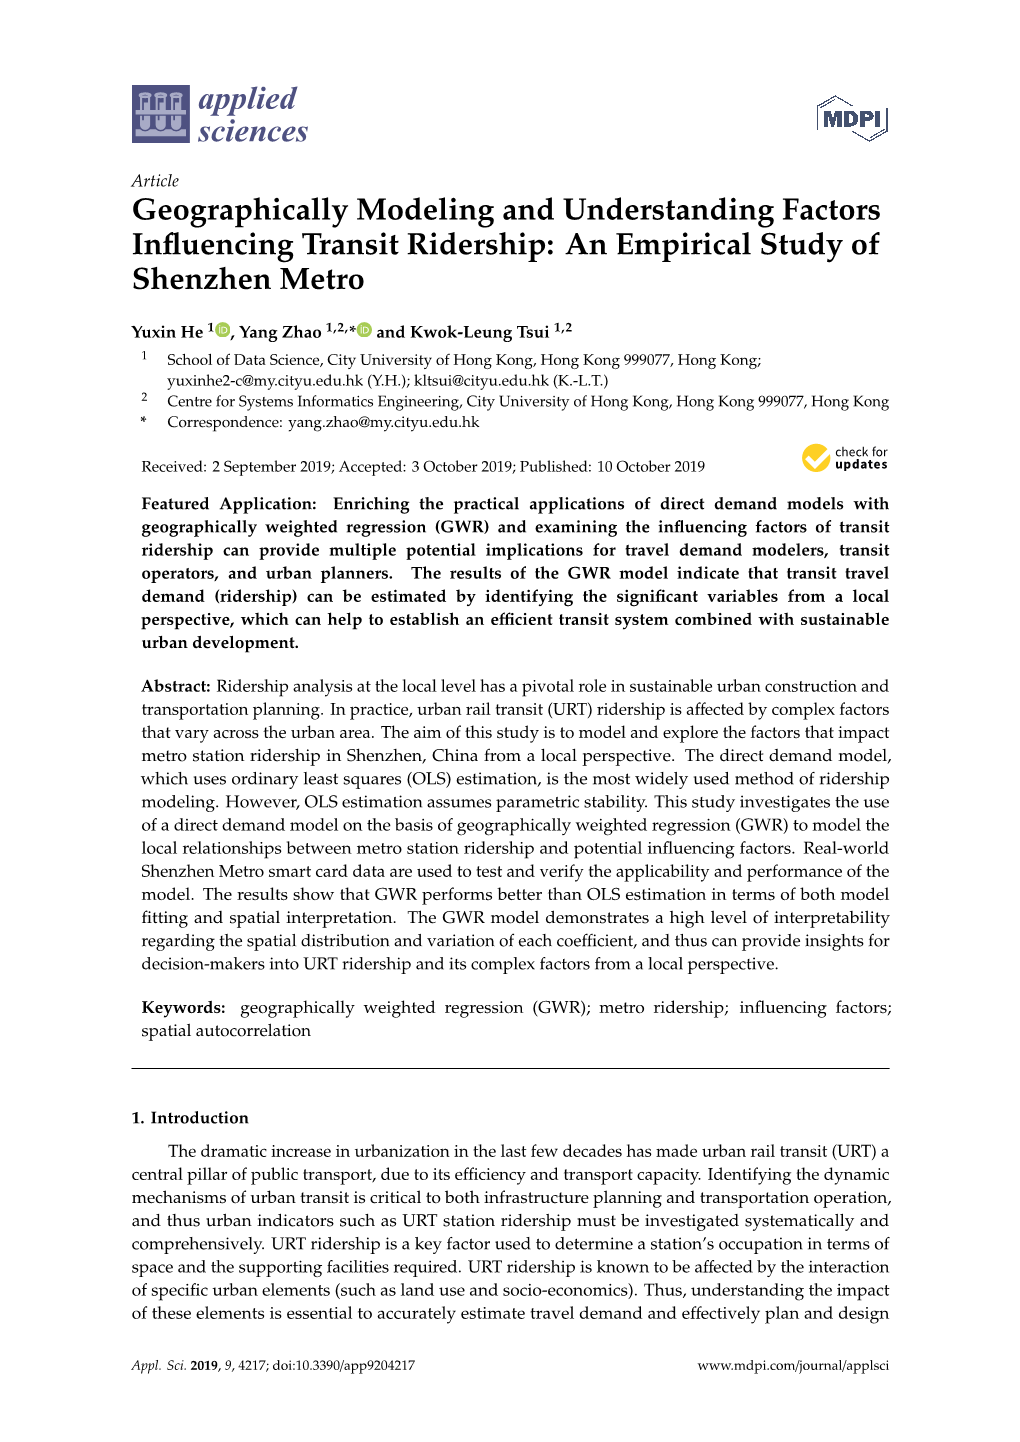 Geographically Modeling and Understanding Factors Inﬂuencing Transit Ridership: an Empirical Study of Shenzhen Metro